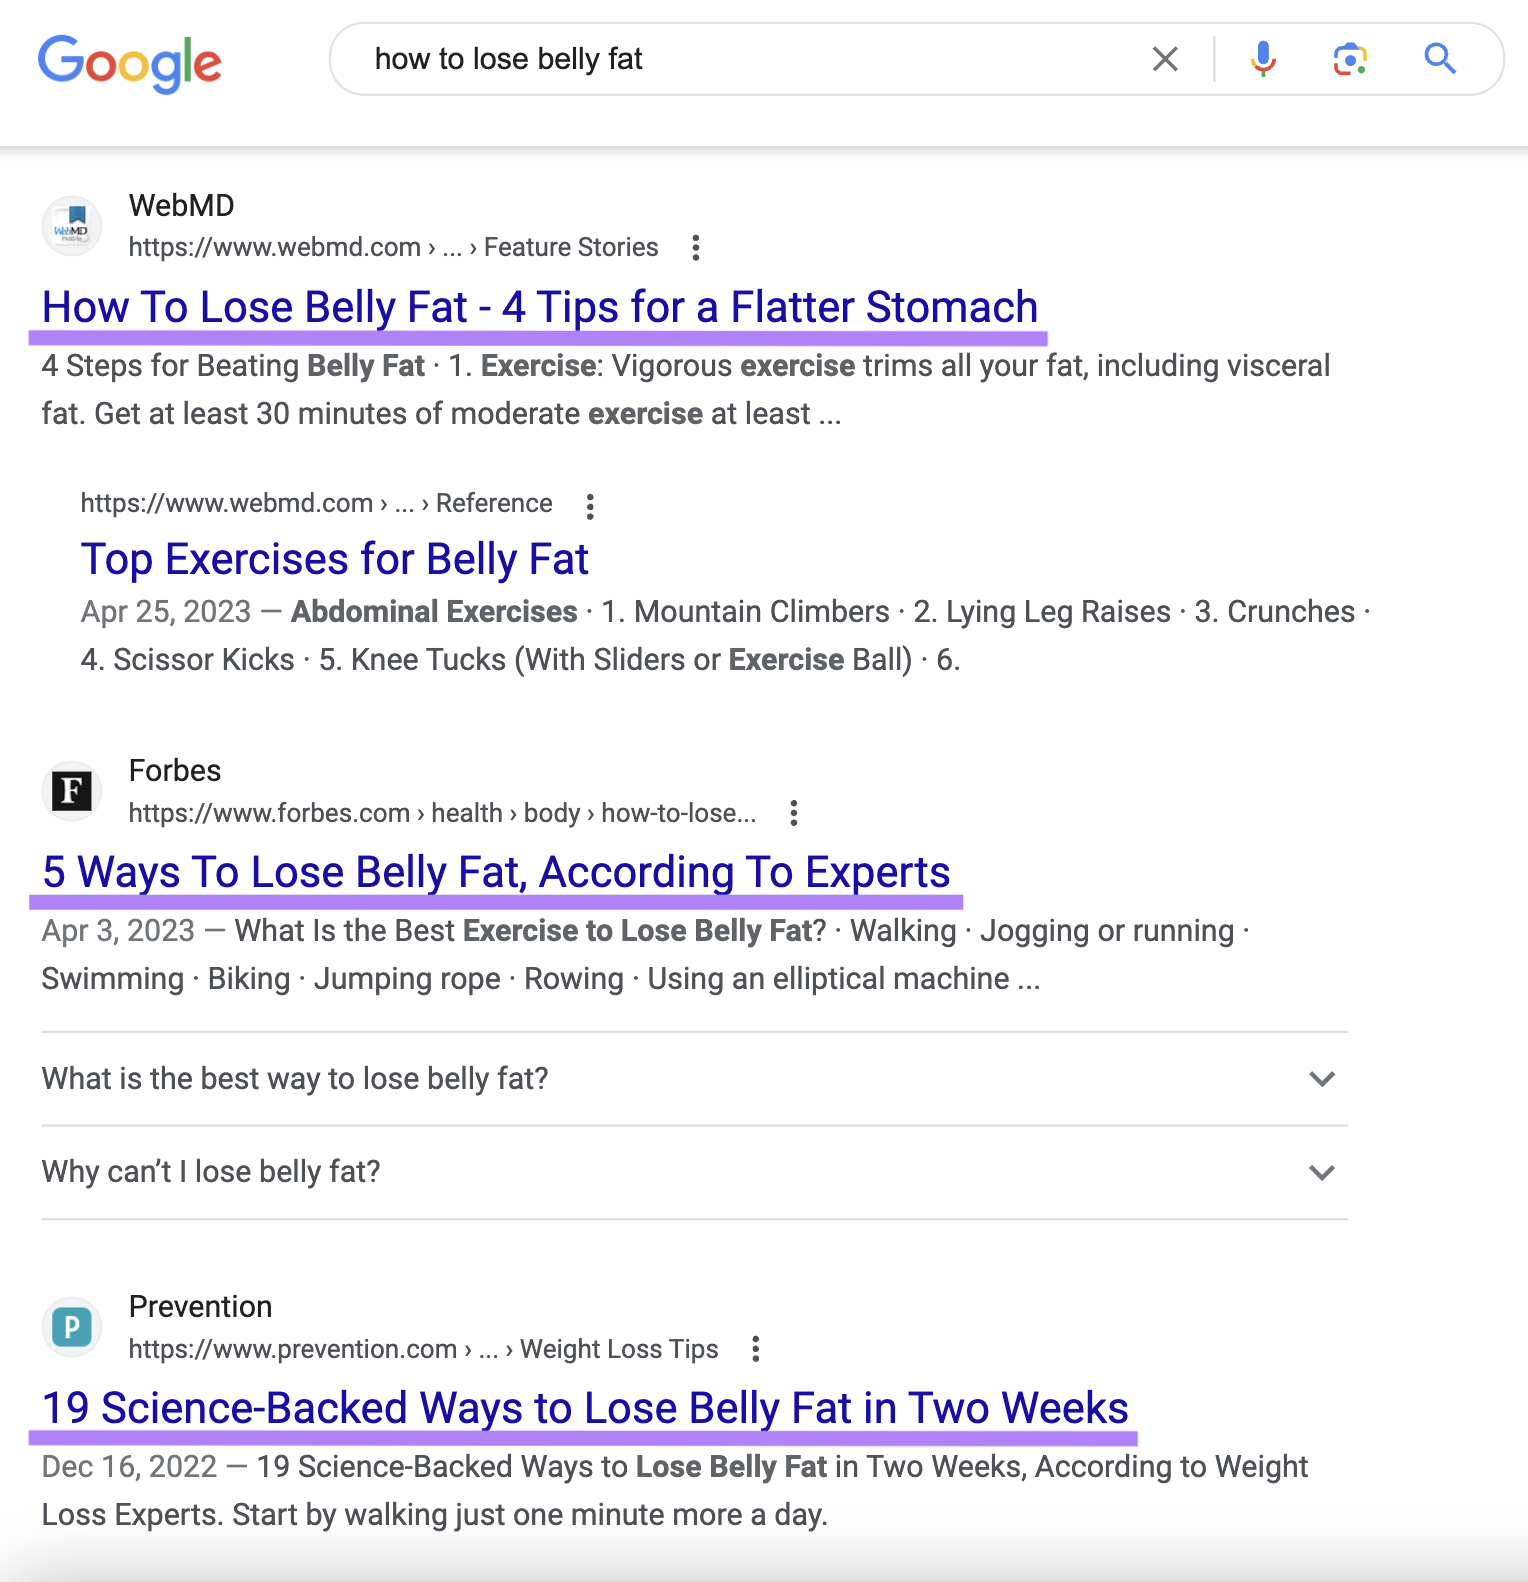 Google search results for “how to lose belly fat”